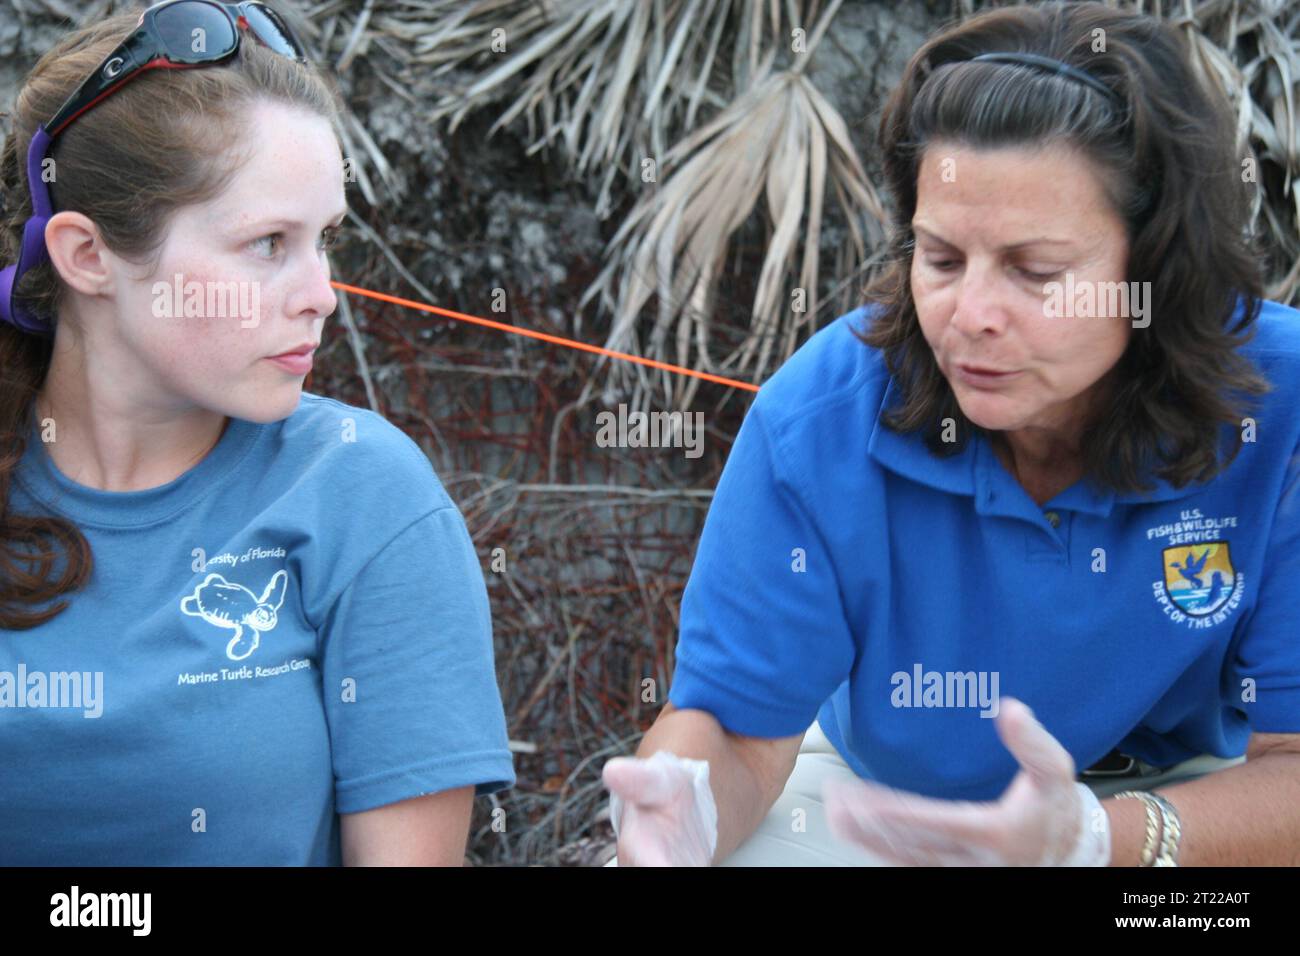 Port St. Joe, FL: USFWS biologist Lorna Patrick and University of Florida student Brail Stephens. Subjects: Deepwater Horizon Oil Spill; Relocation; Reptiles; Volunteers; Employees (USFWS); Service patch; Connecting people with nature. Location: Florida. Stock Photo